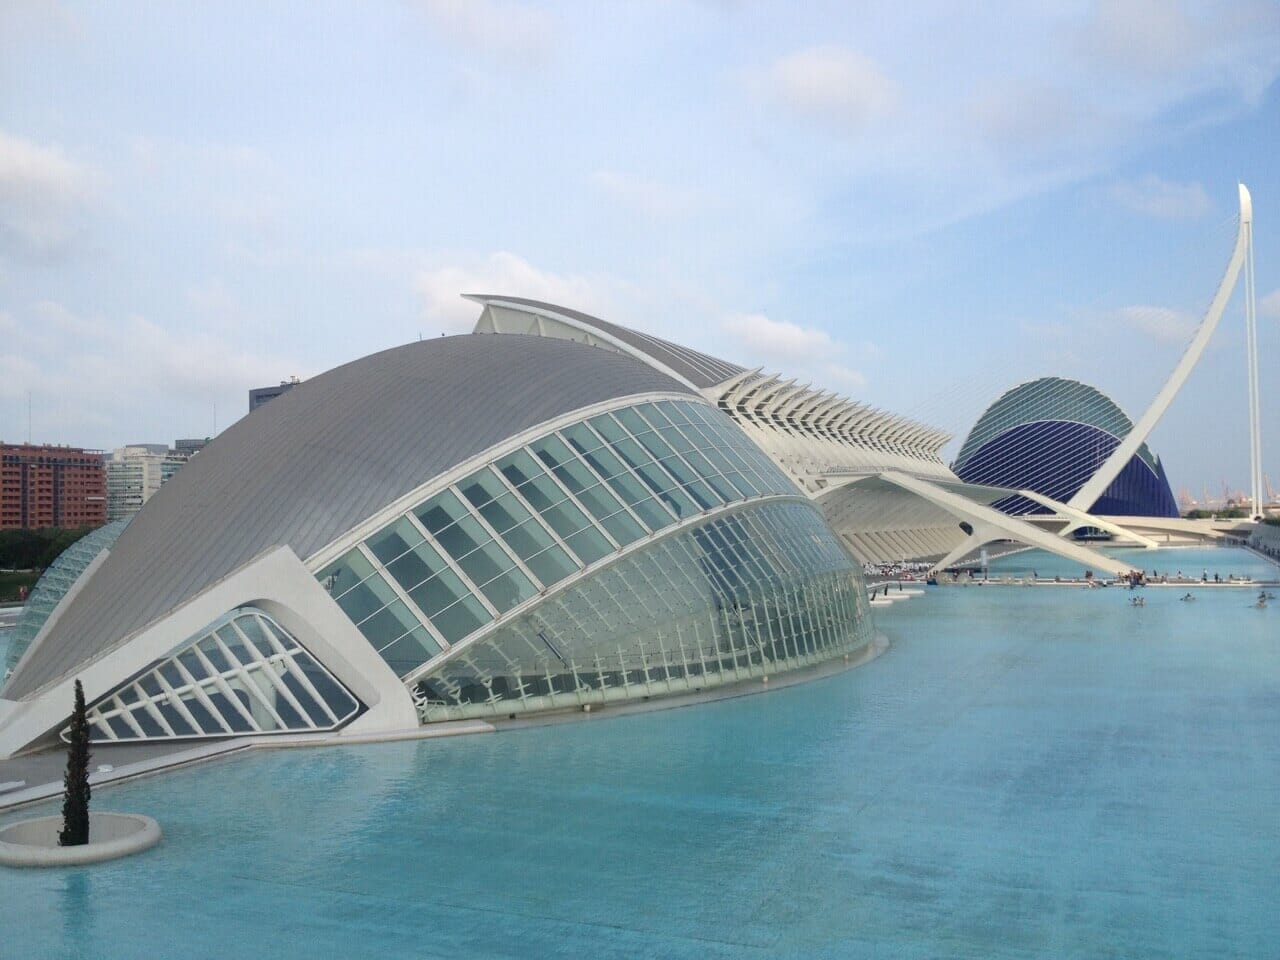 The city of Arts and Science complex in Valencia, Spain